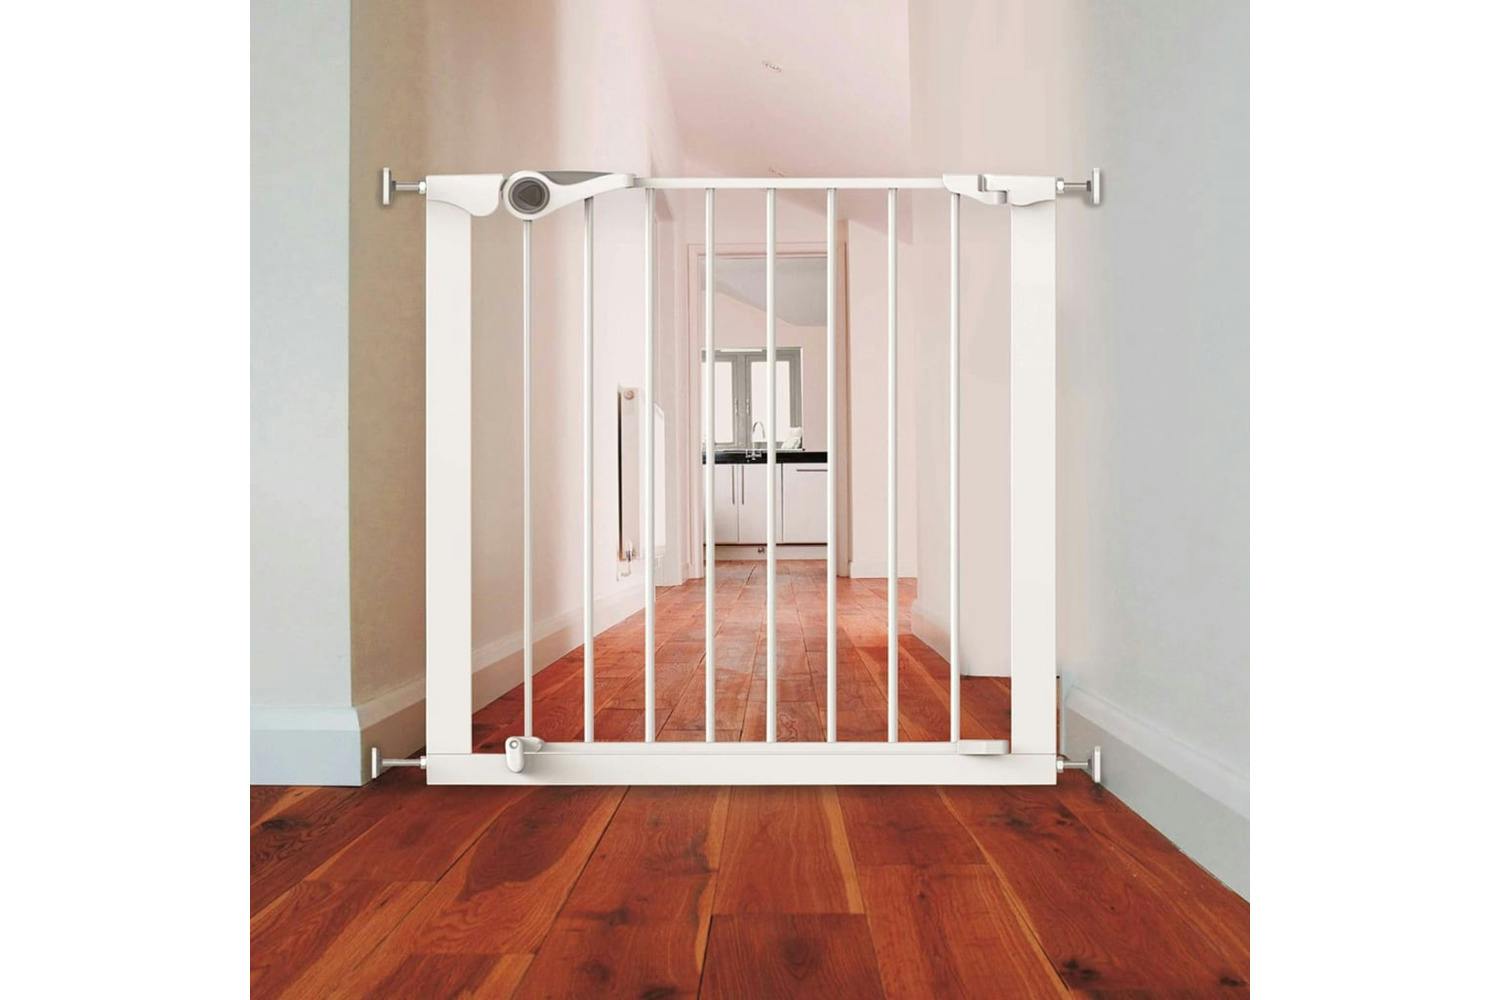 Noma 419489 Safety Gate Easy Pressure Fit 75-82 Cm Metal Whi